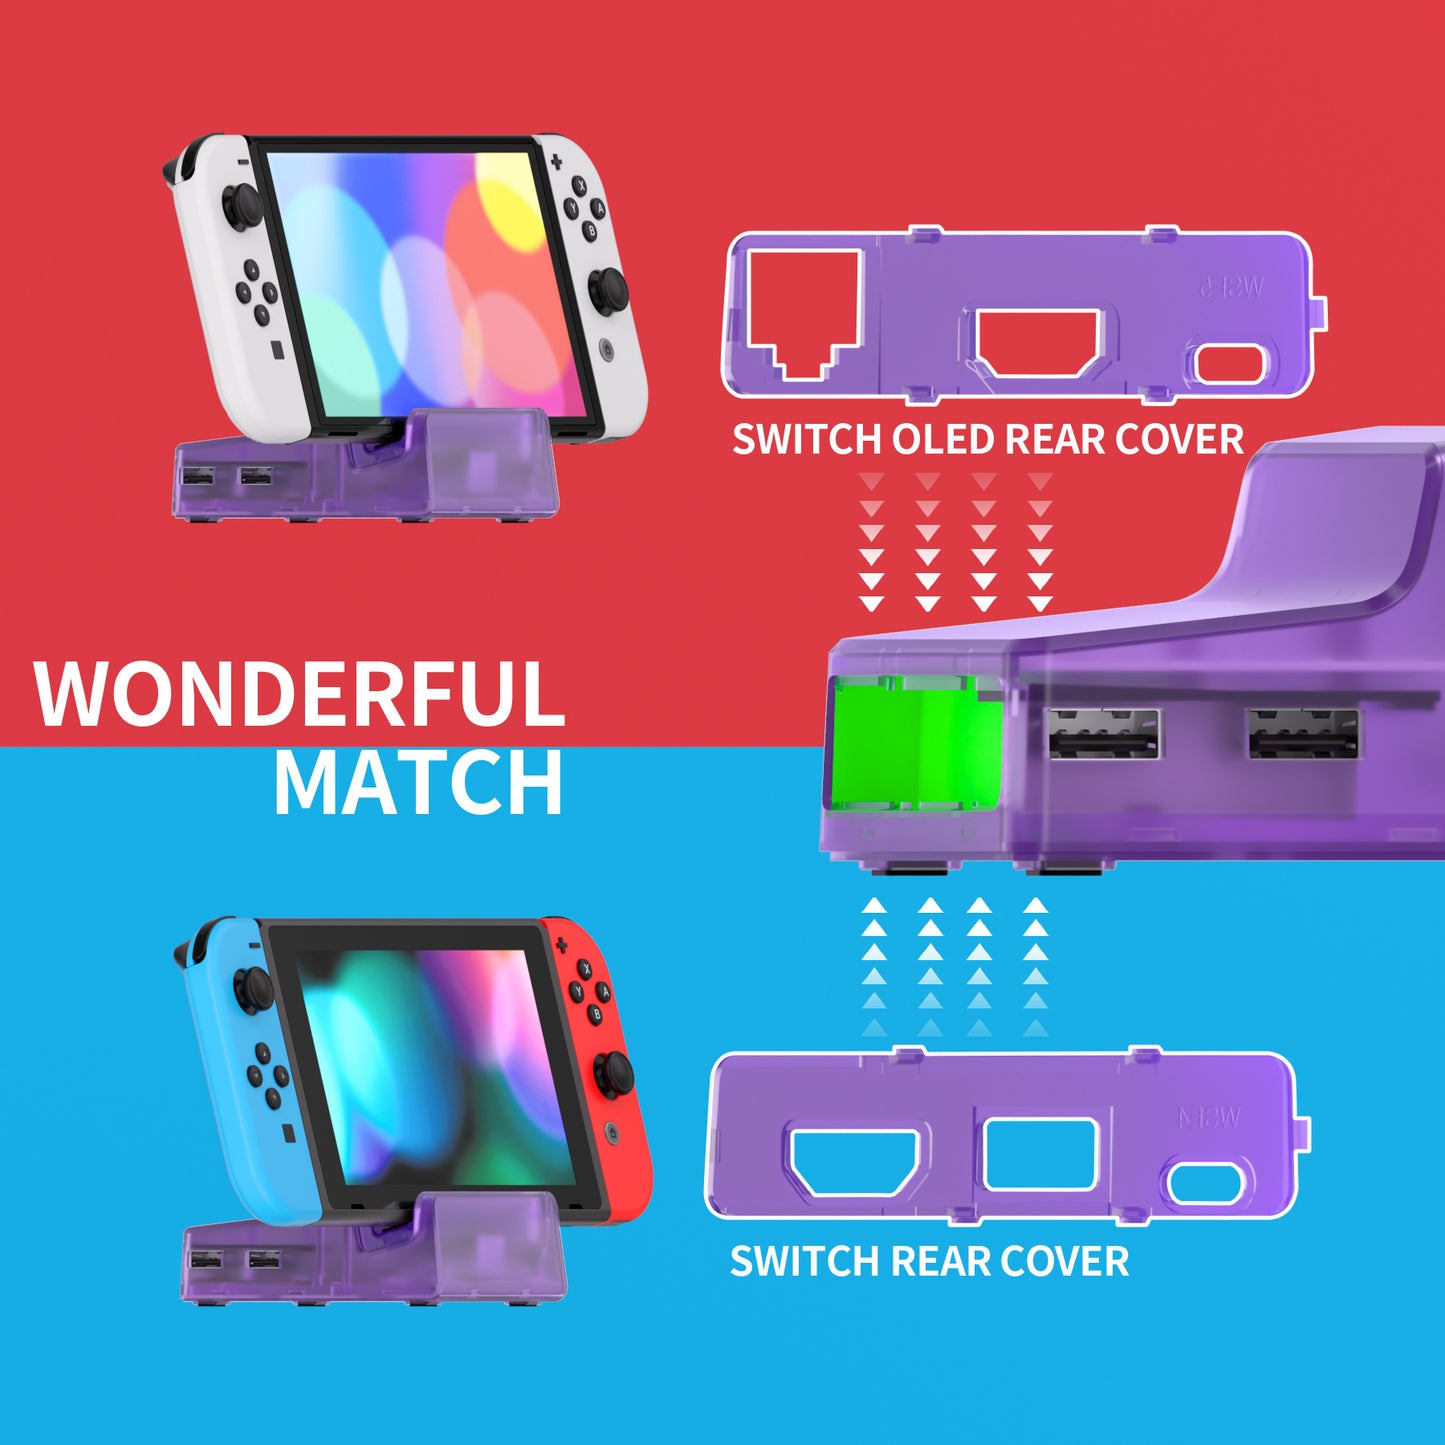 eXtremeRate AiryDocky DIY Kit Replacement Shell Case for Nintendo Switch Dock - Clear Atomic Purple eXtremeRate